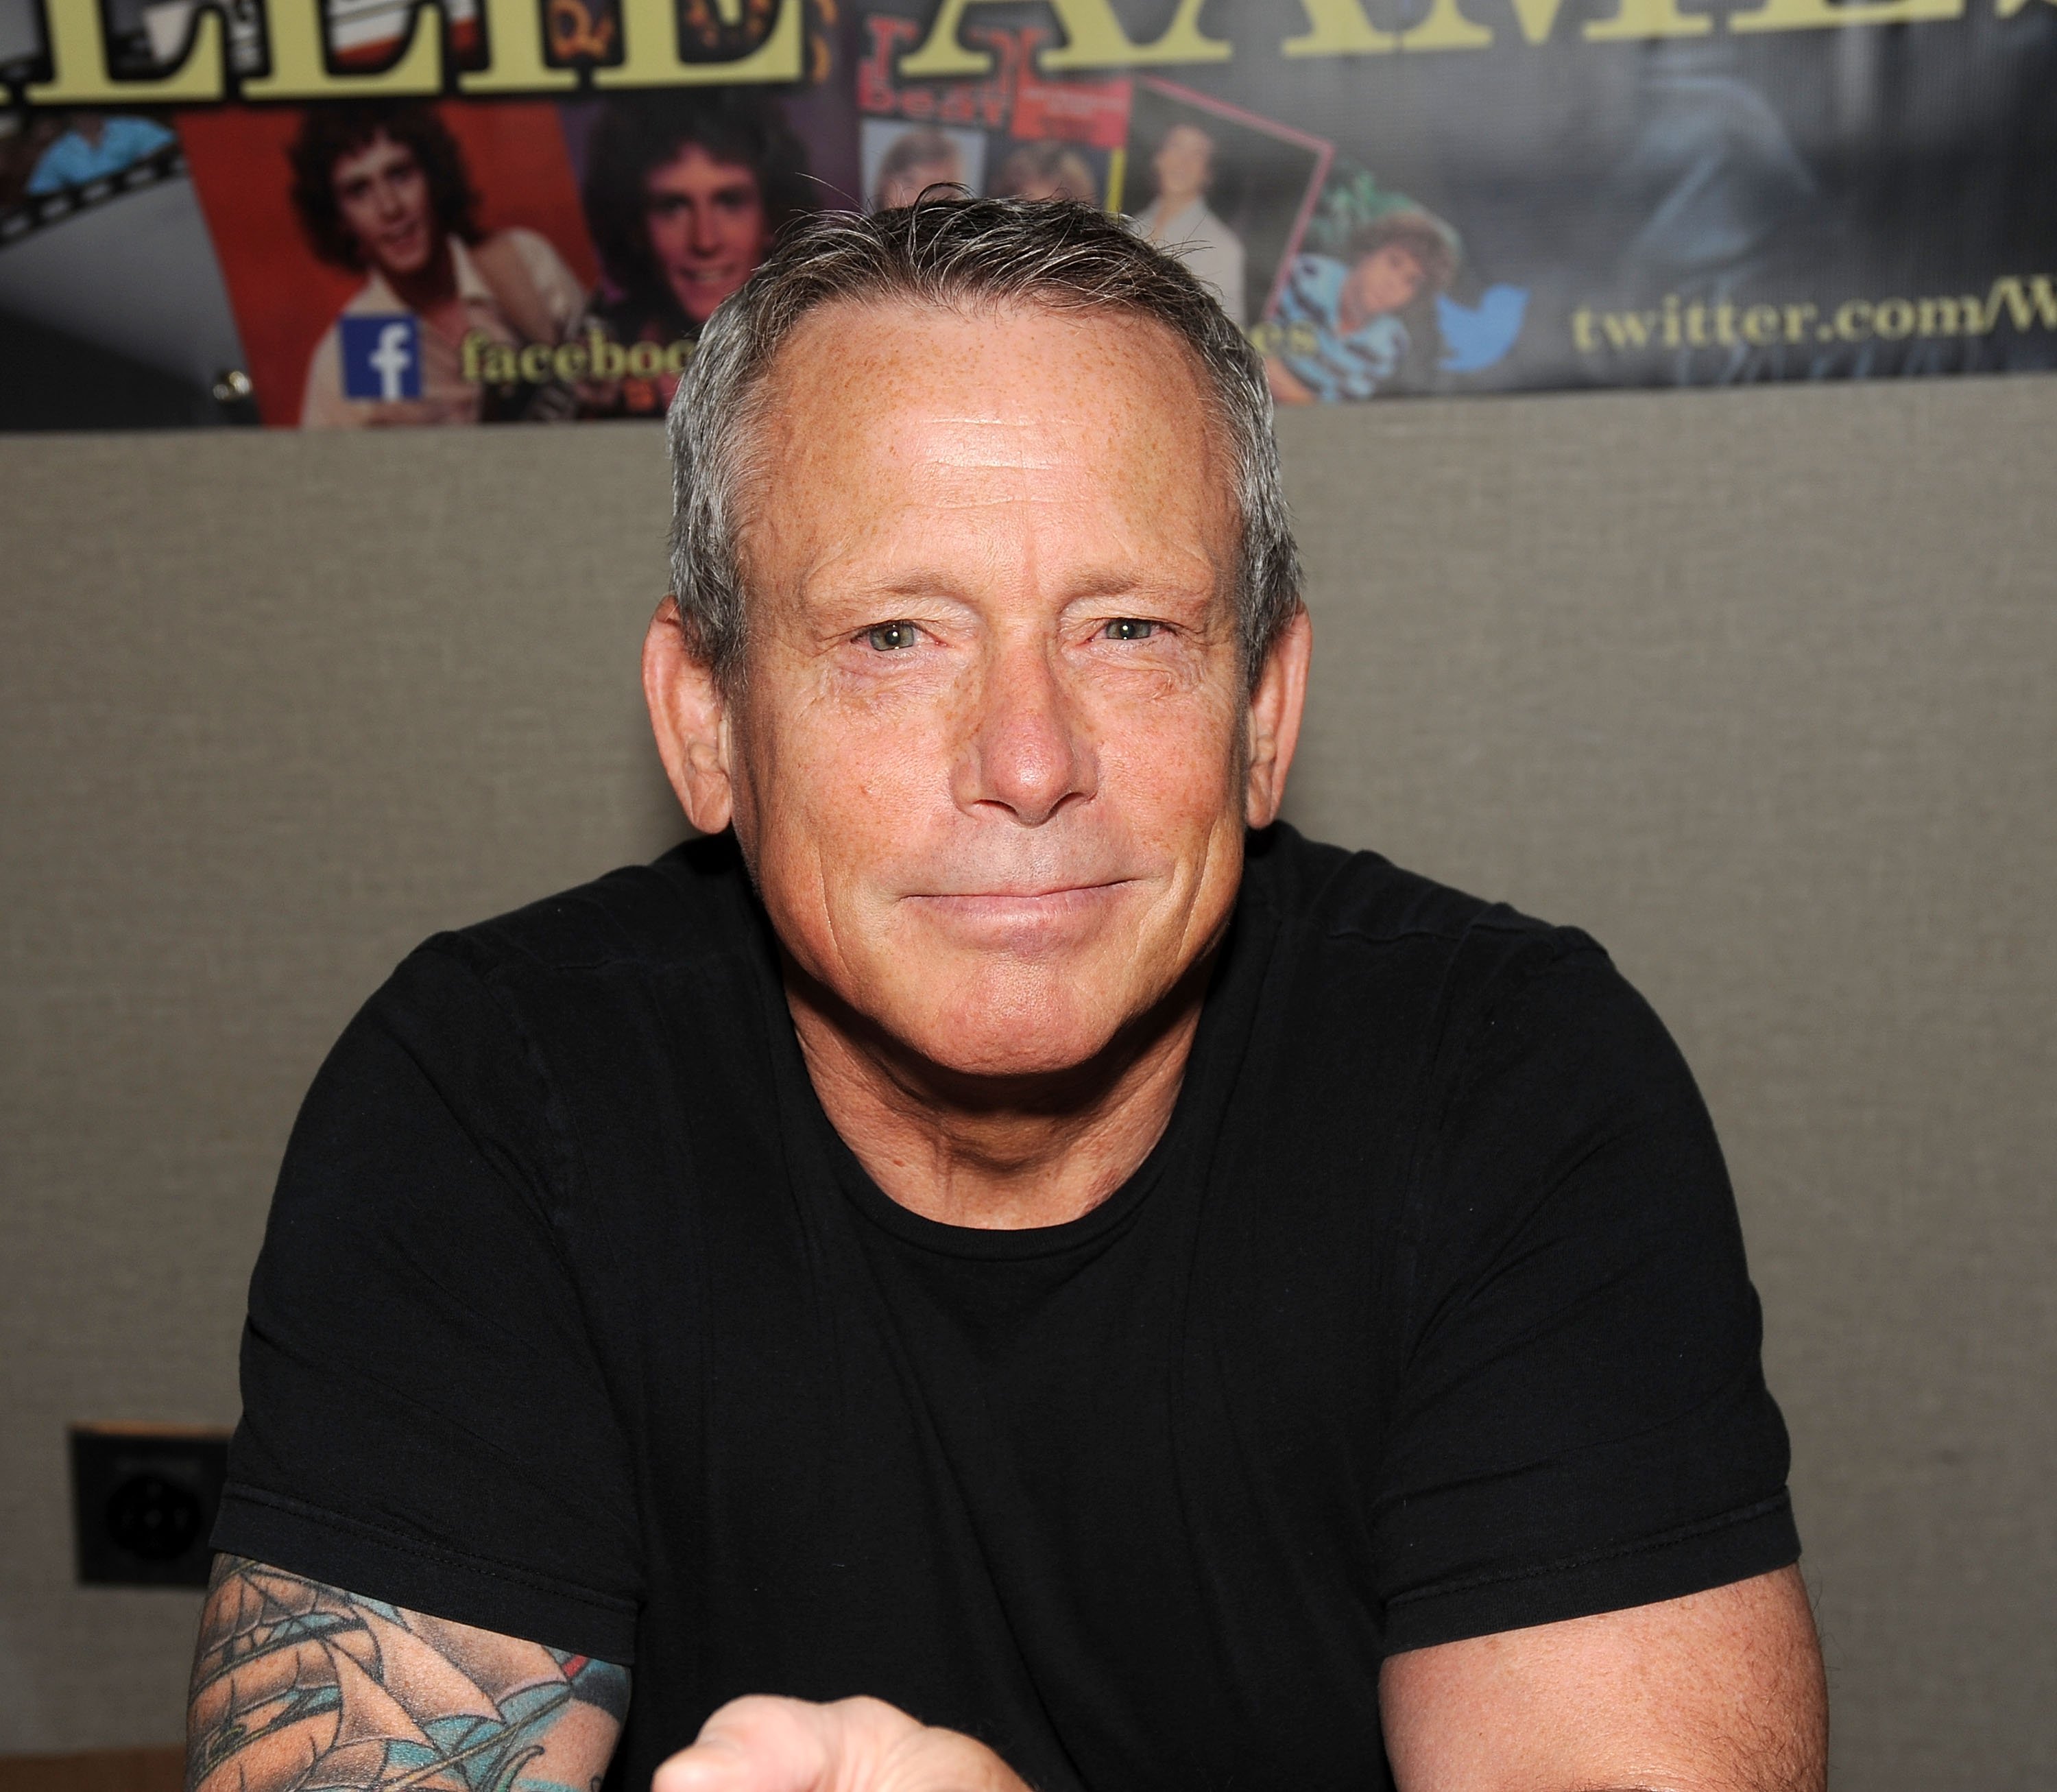 Willie Aames at the Chiller Theater Expo Winter 2017 on October 27, 2017 in Parsippany, New Jersey. | Source: Getty Images